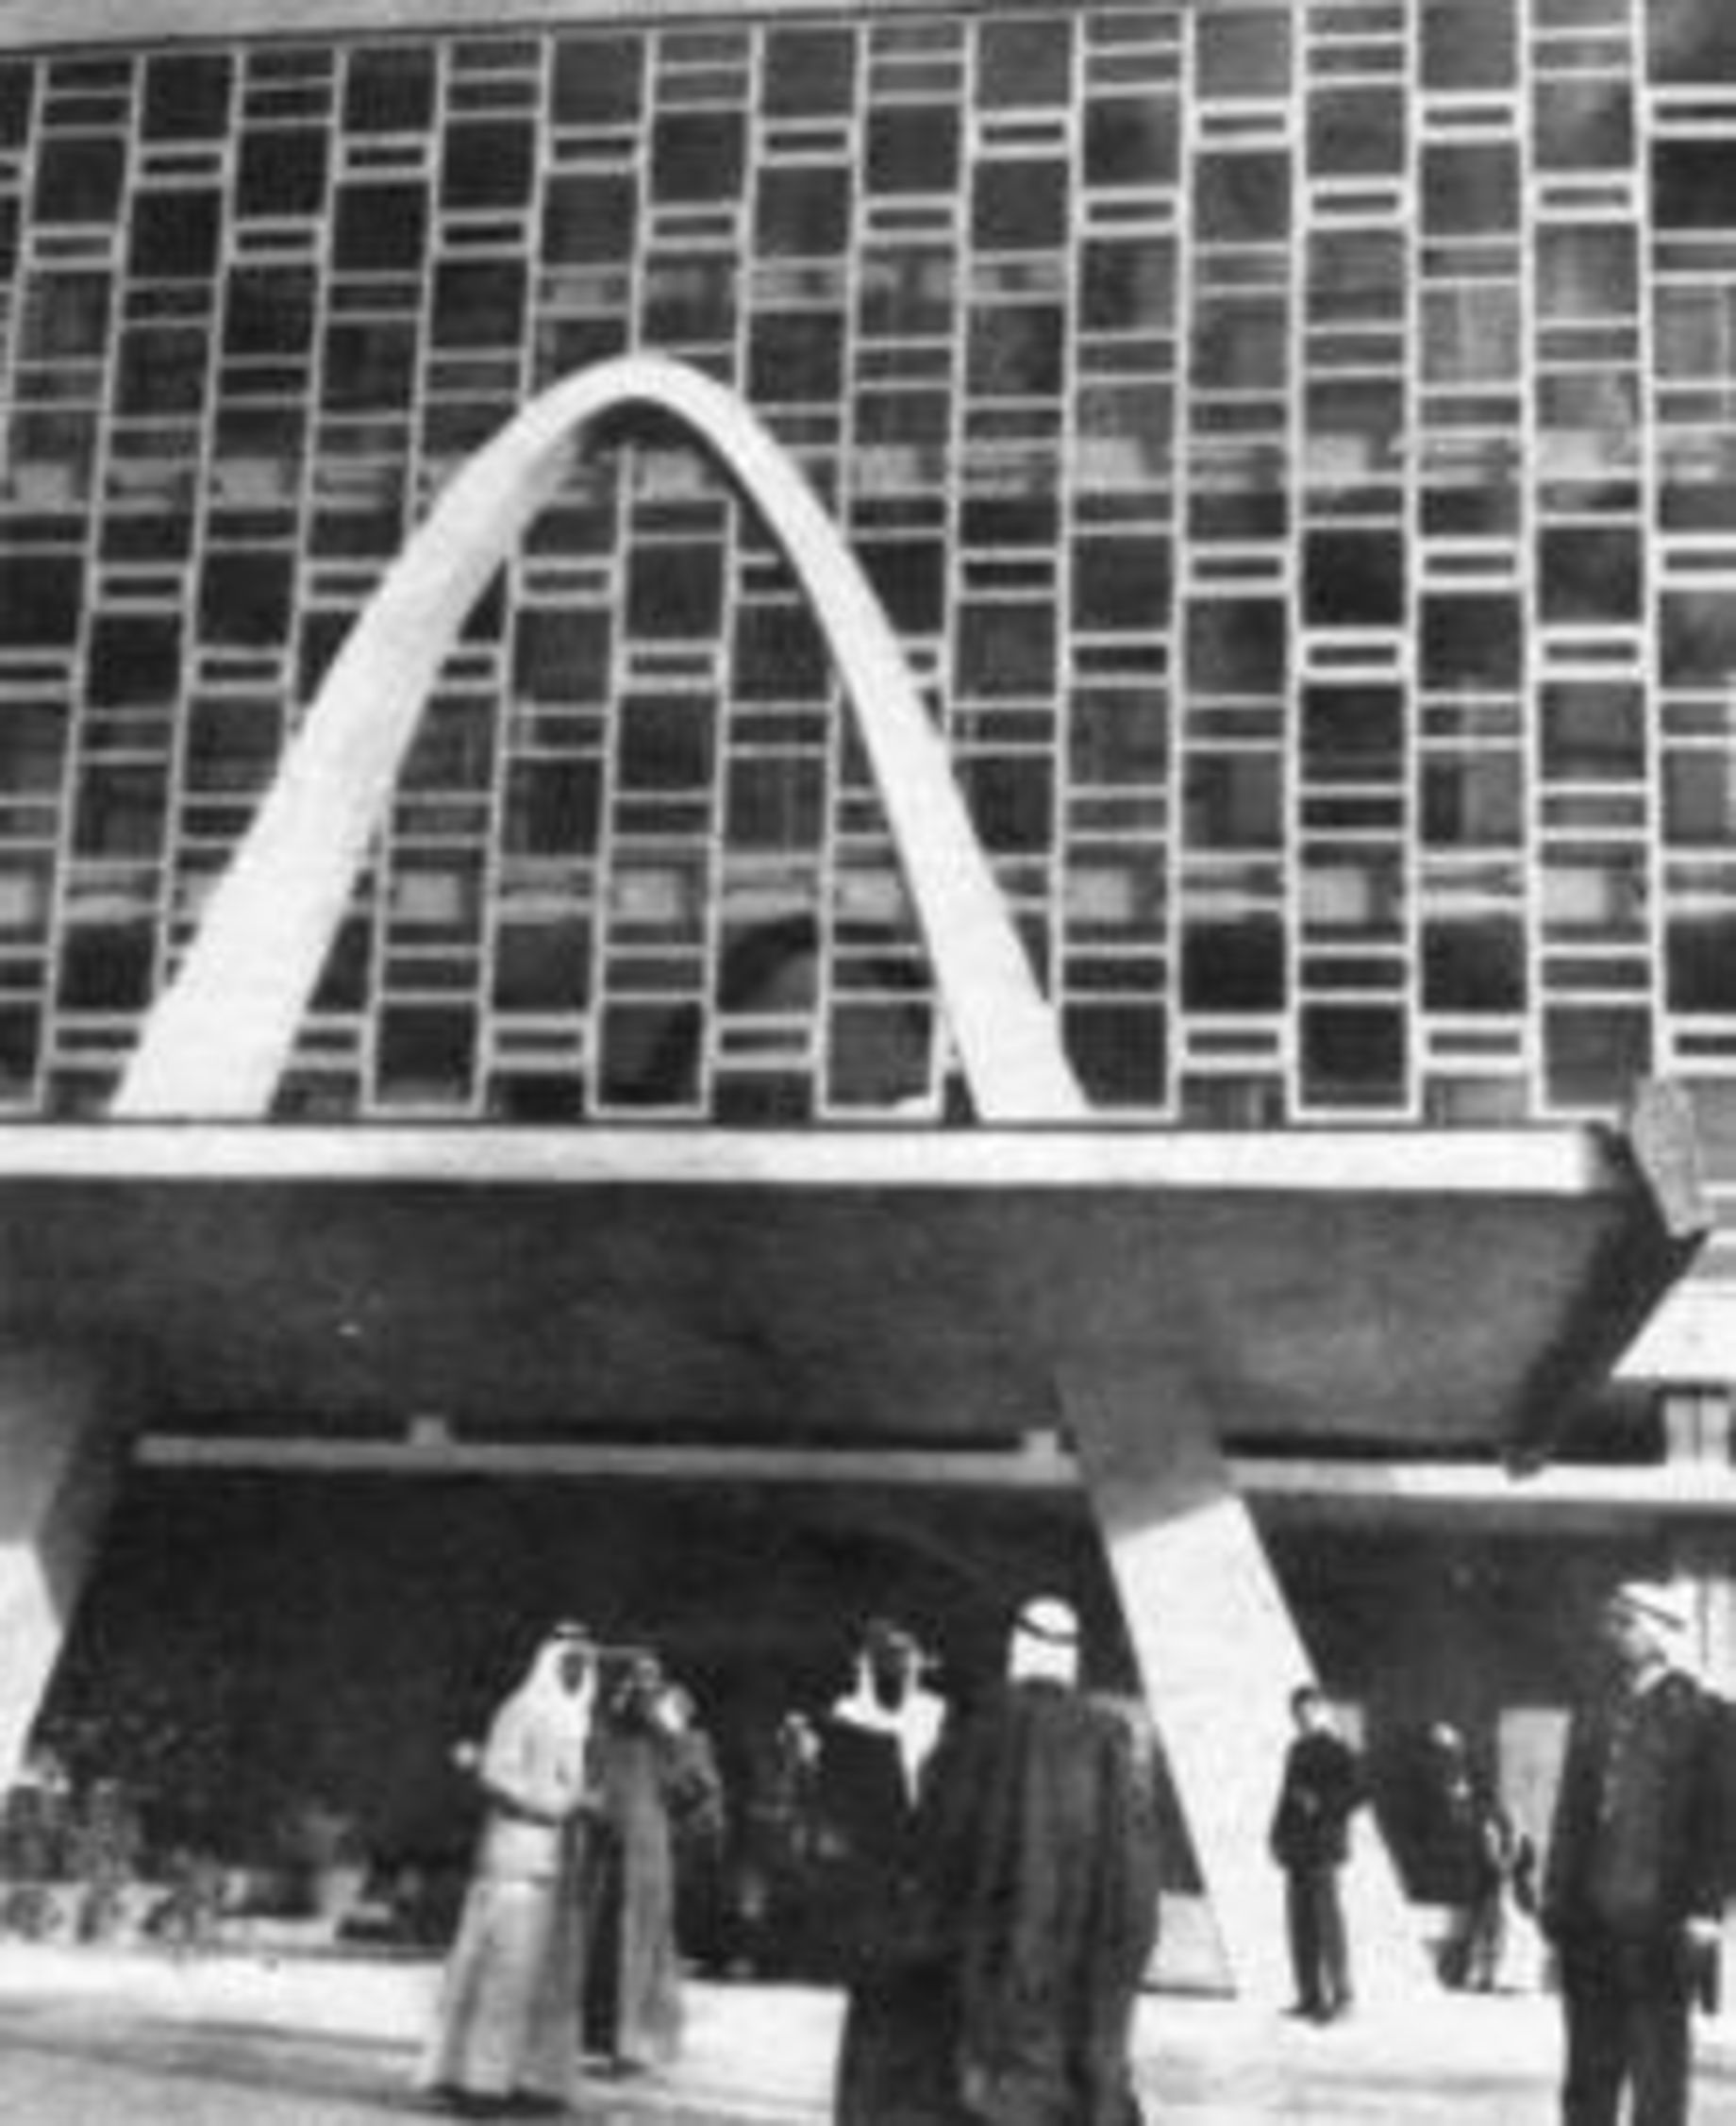 A government building designed by Egyptian architects in Kuwait. Published in 1963 in the popular magazine “al-Musawwar”